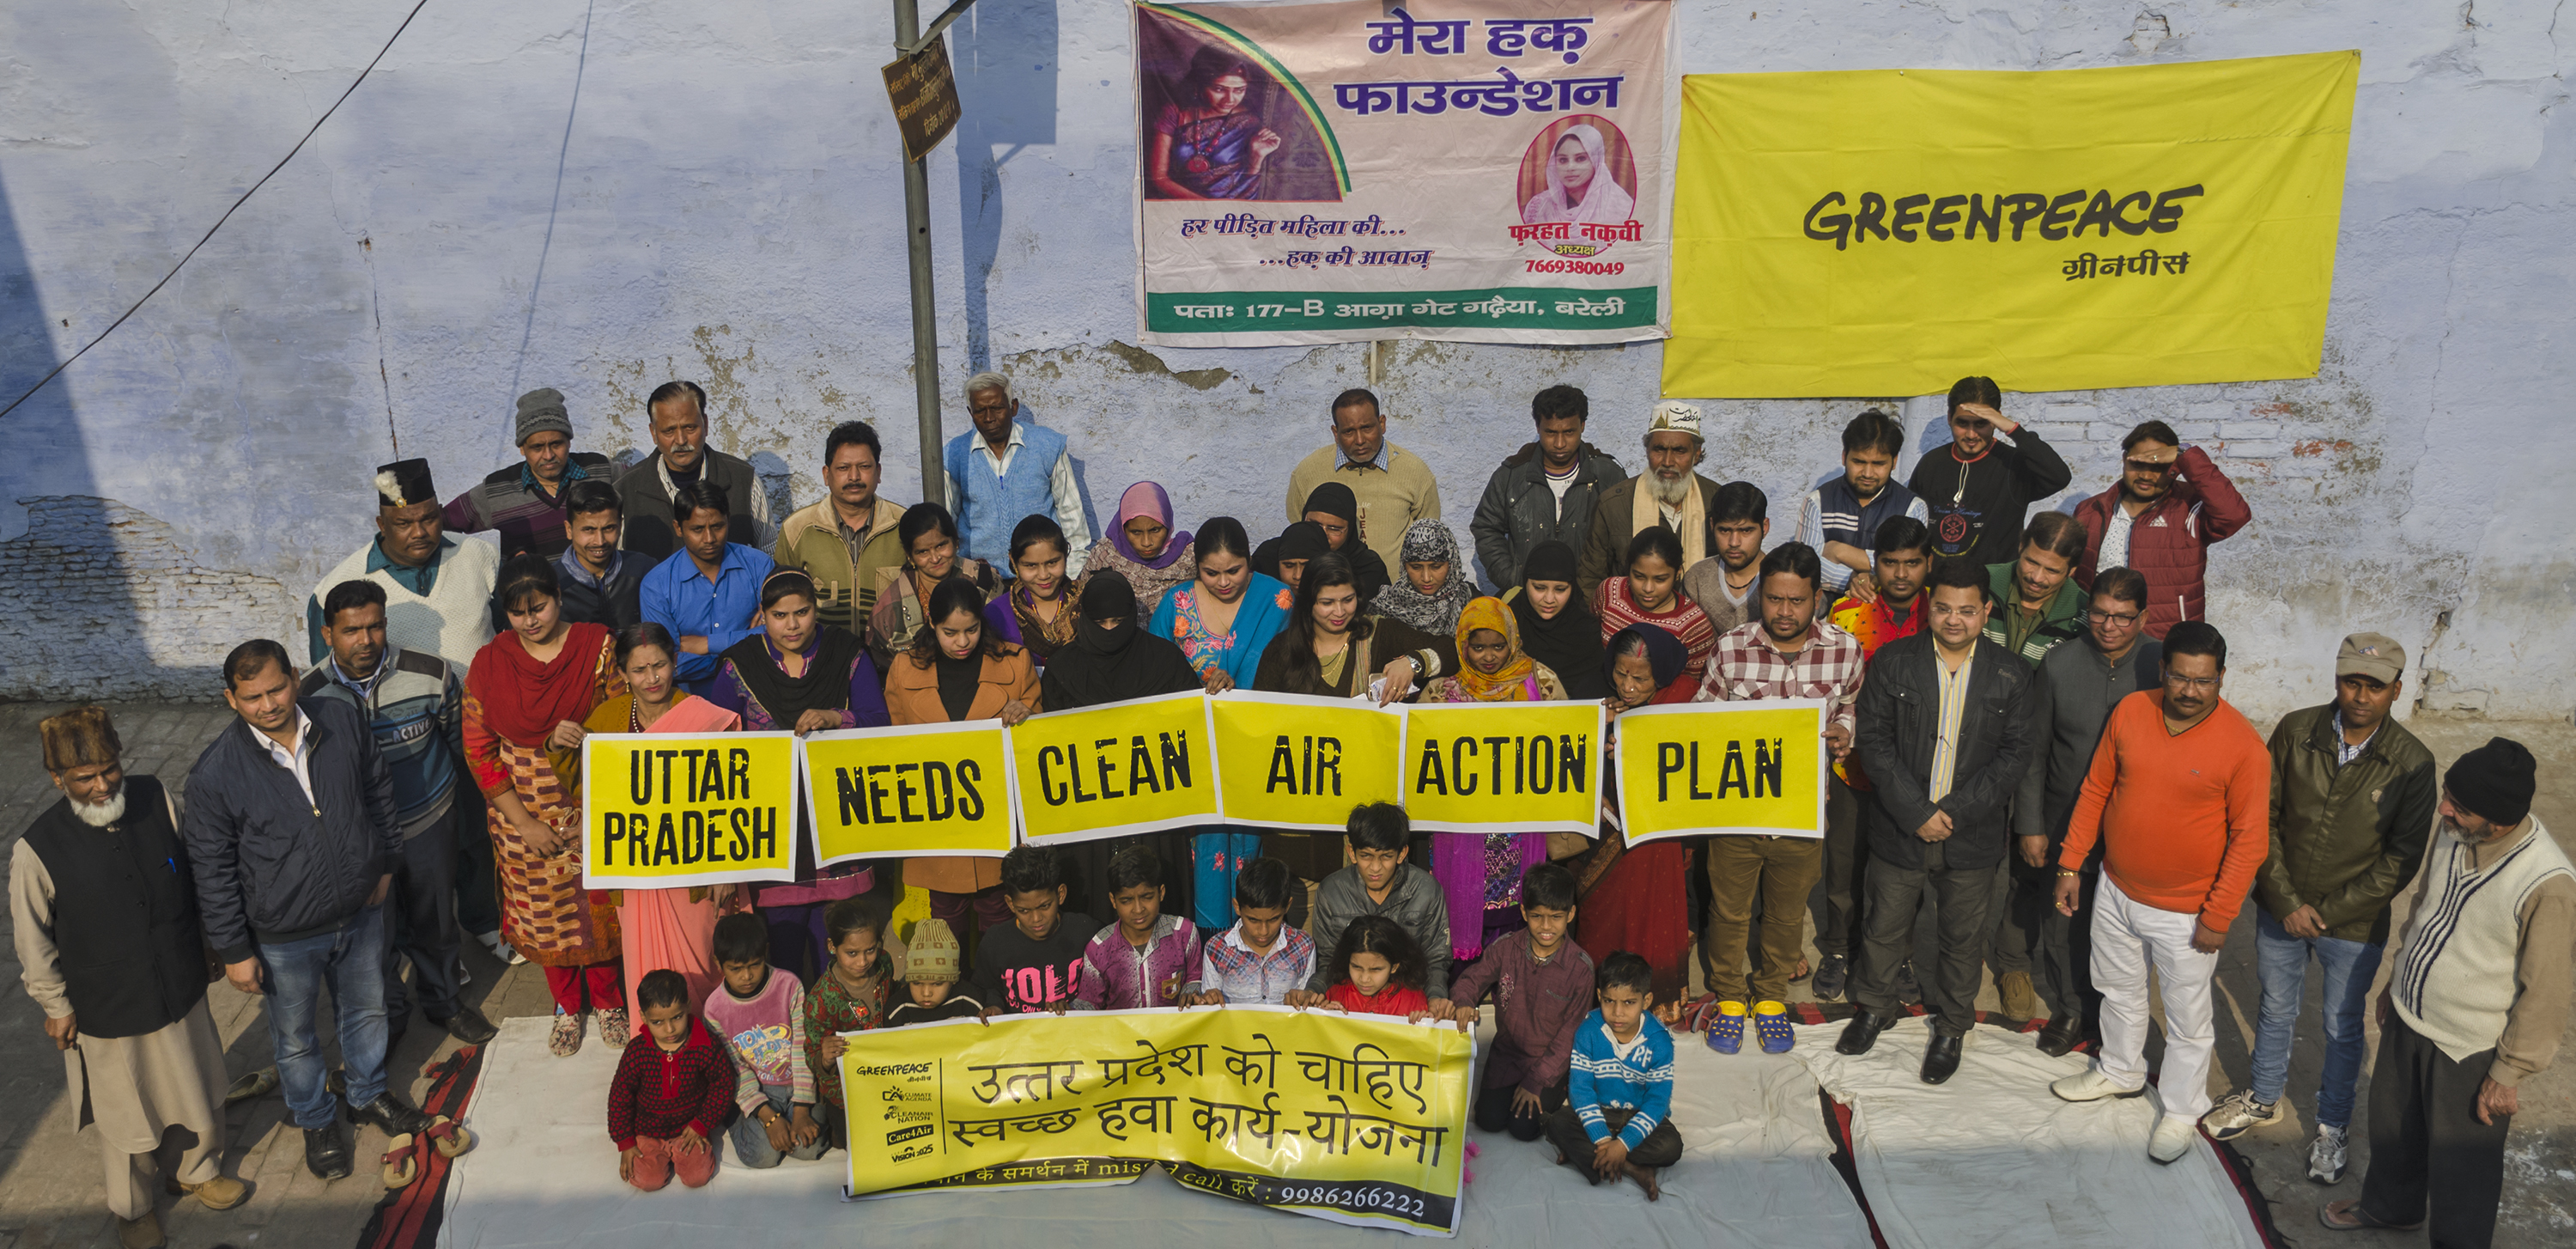 Rally against air pollution organized by different organizations (1)